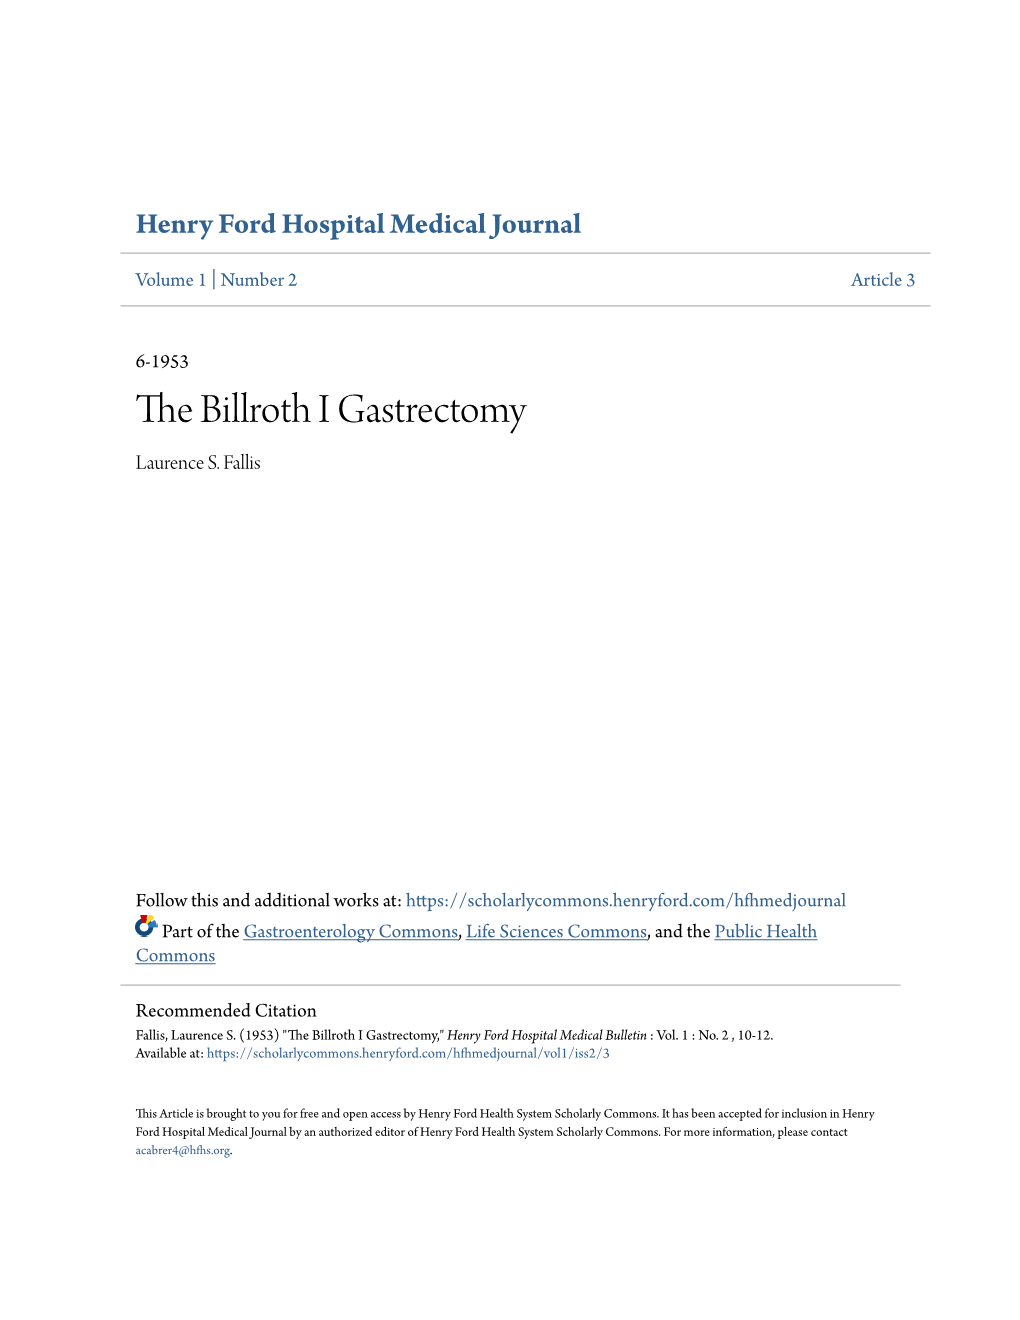 The Billroth I Gastrectomy Laurence S